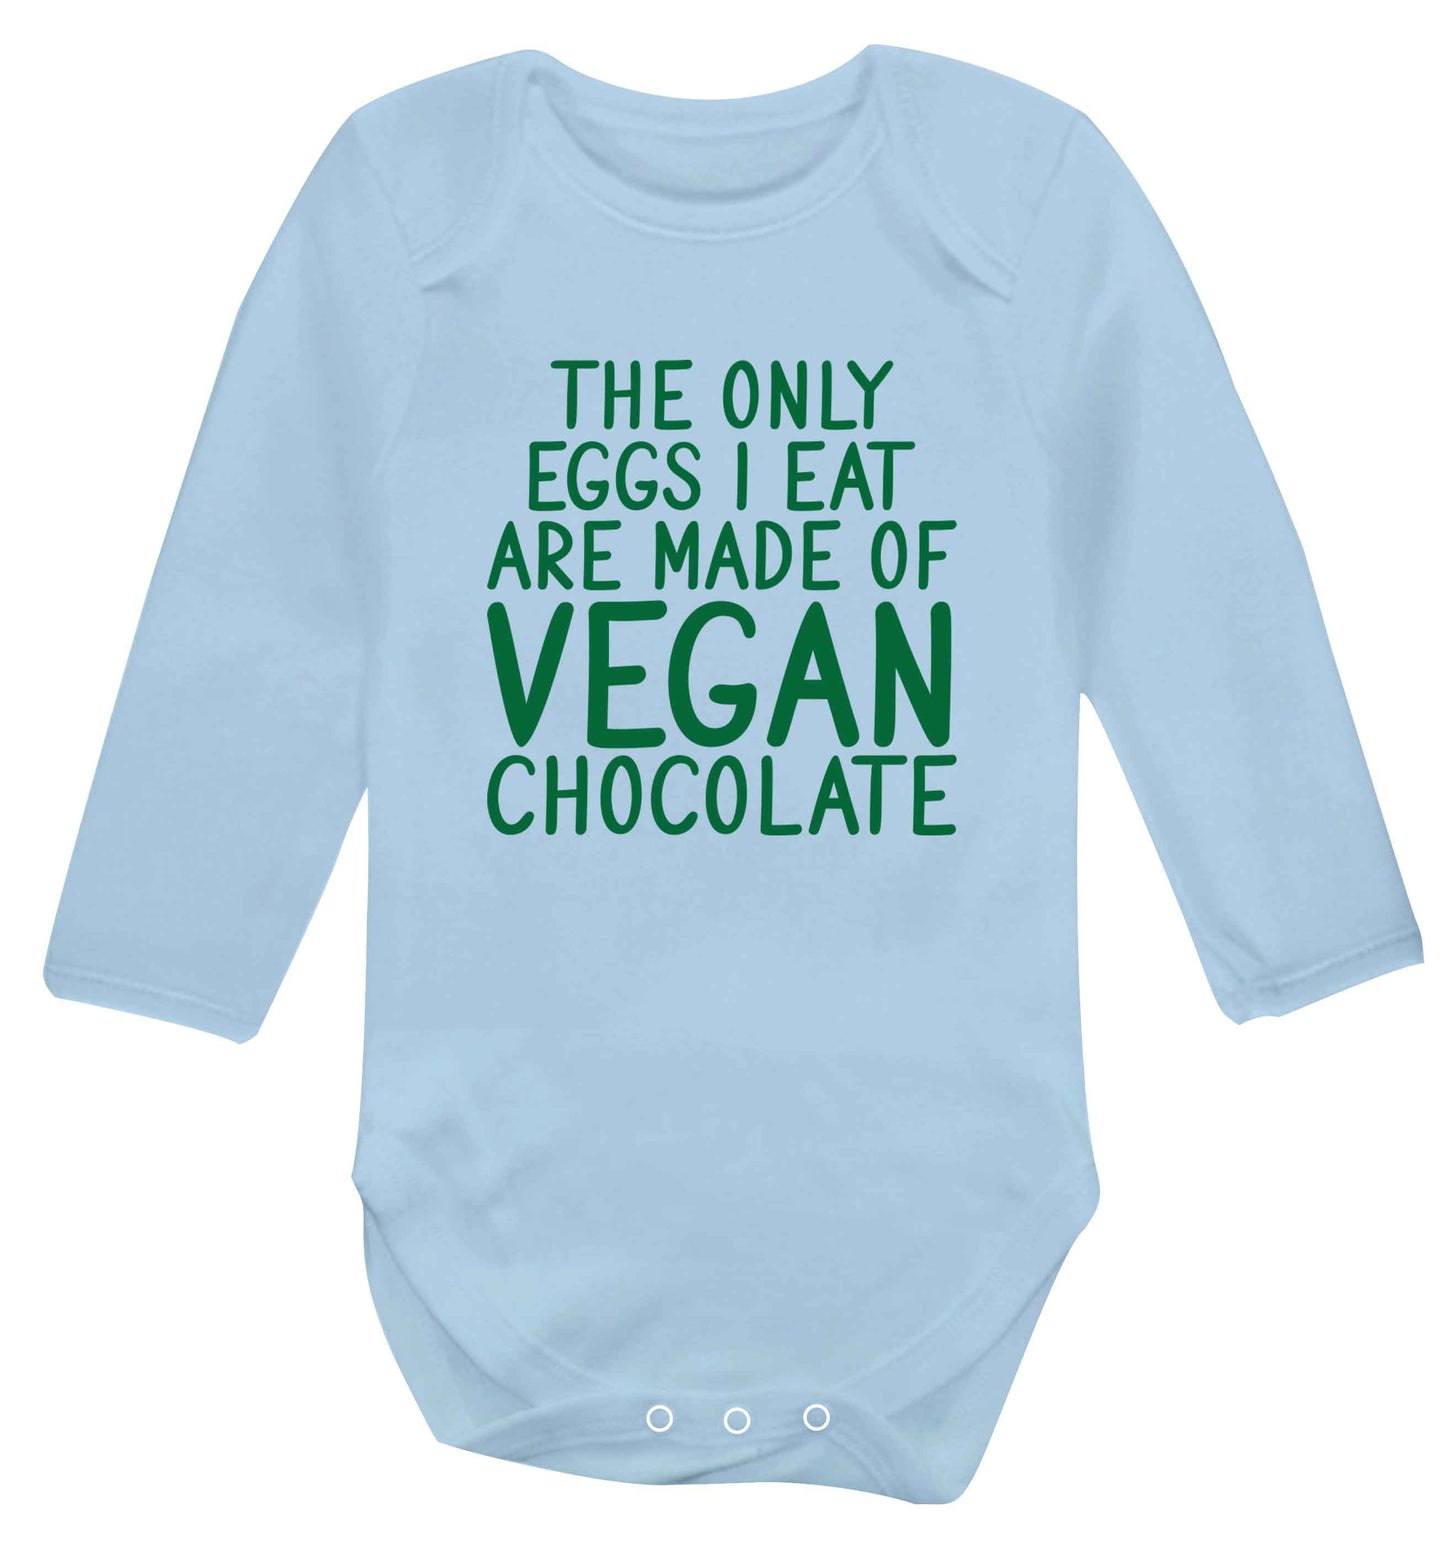 The only eggs I eat are made of vegan chocolate baby vest long sleeved pale blue 6-12 months